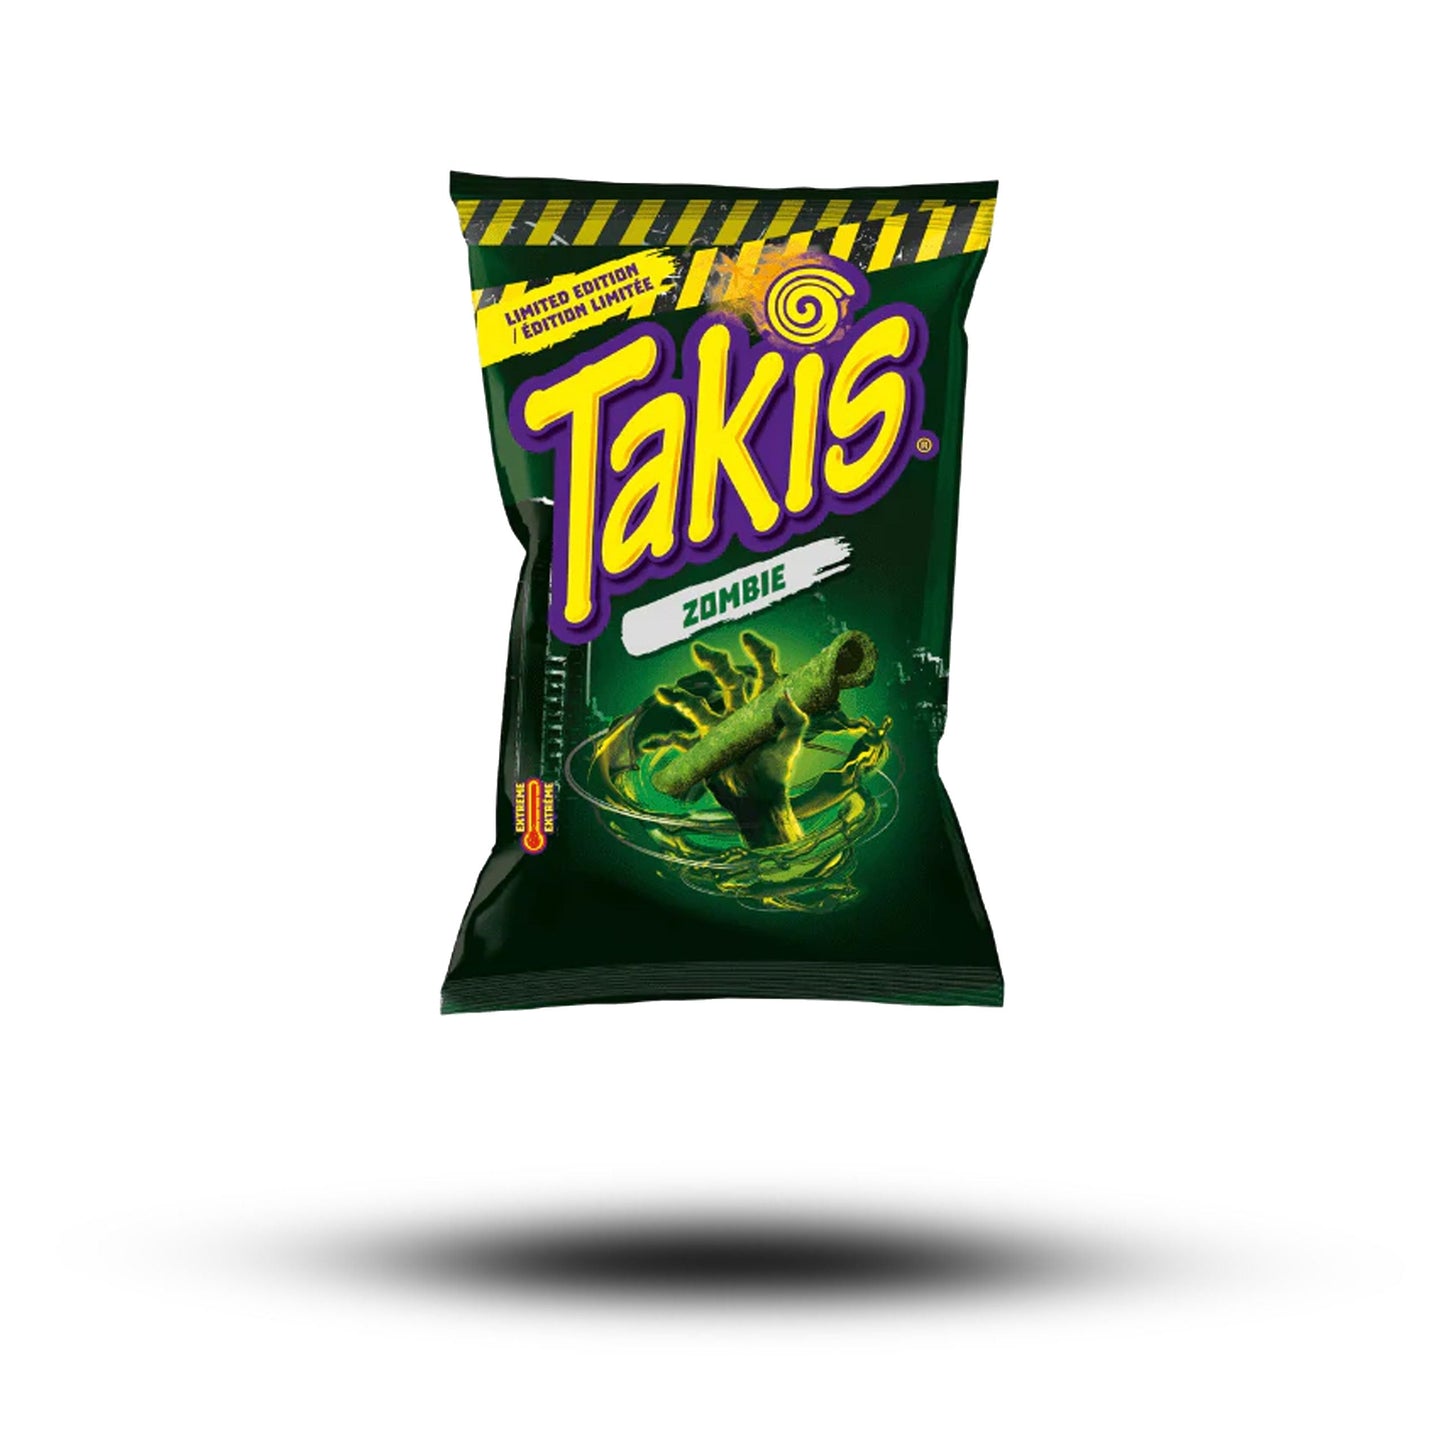 Takis Zombie 280g Limited Edition